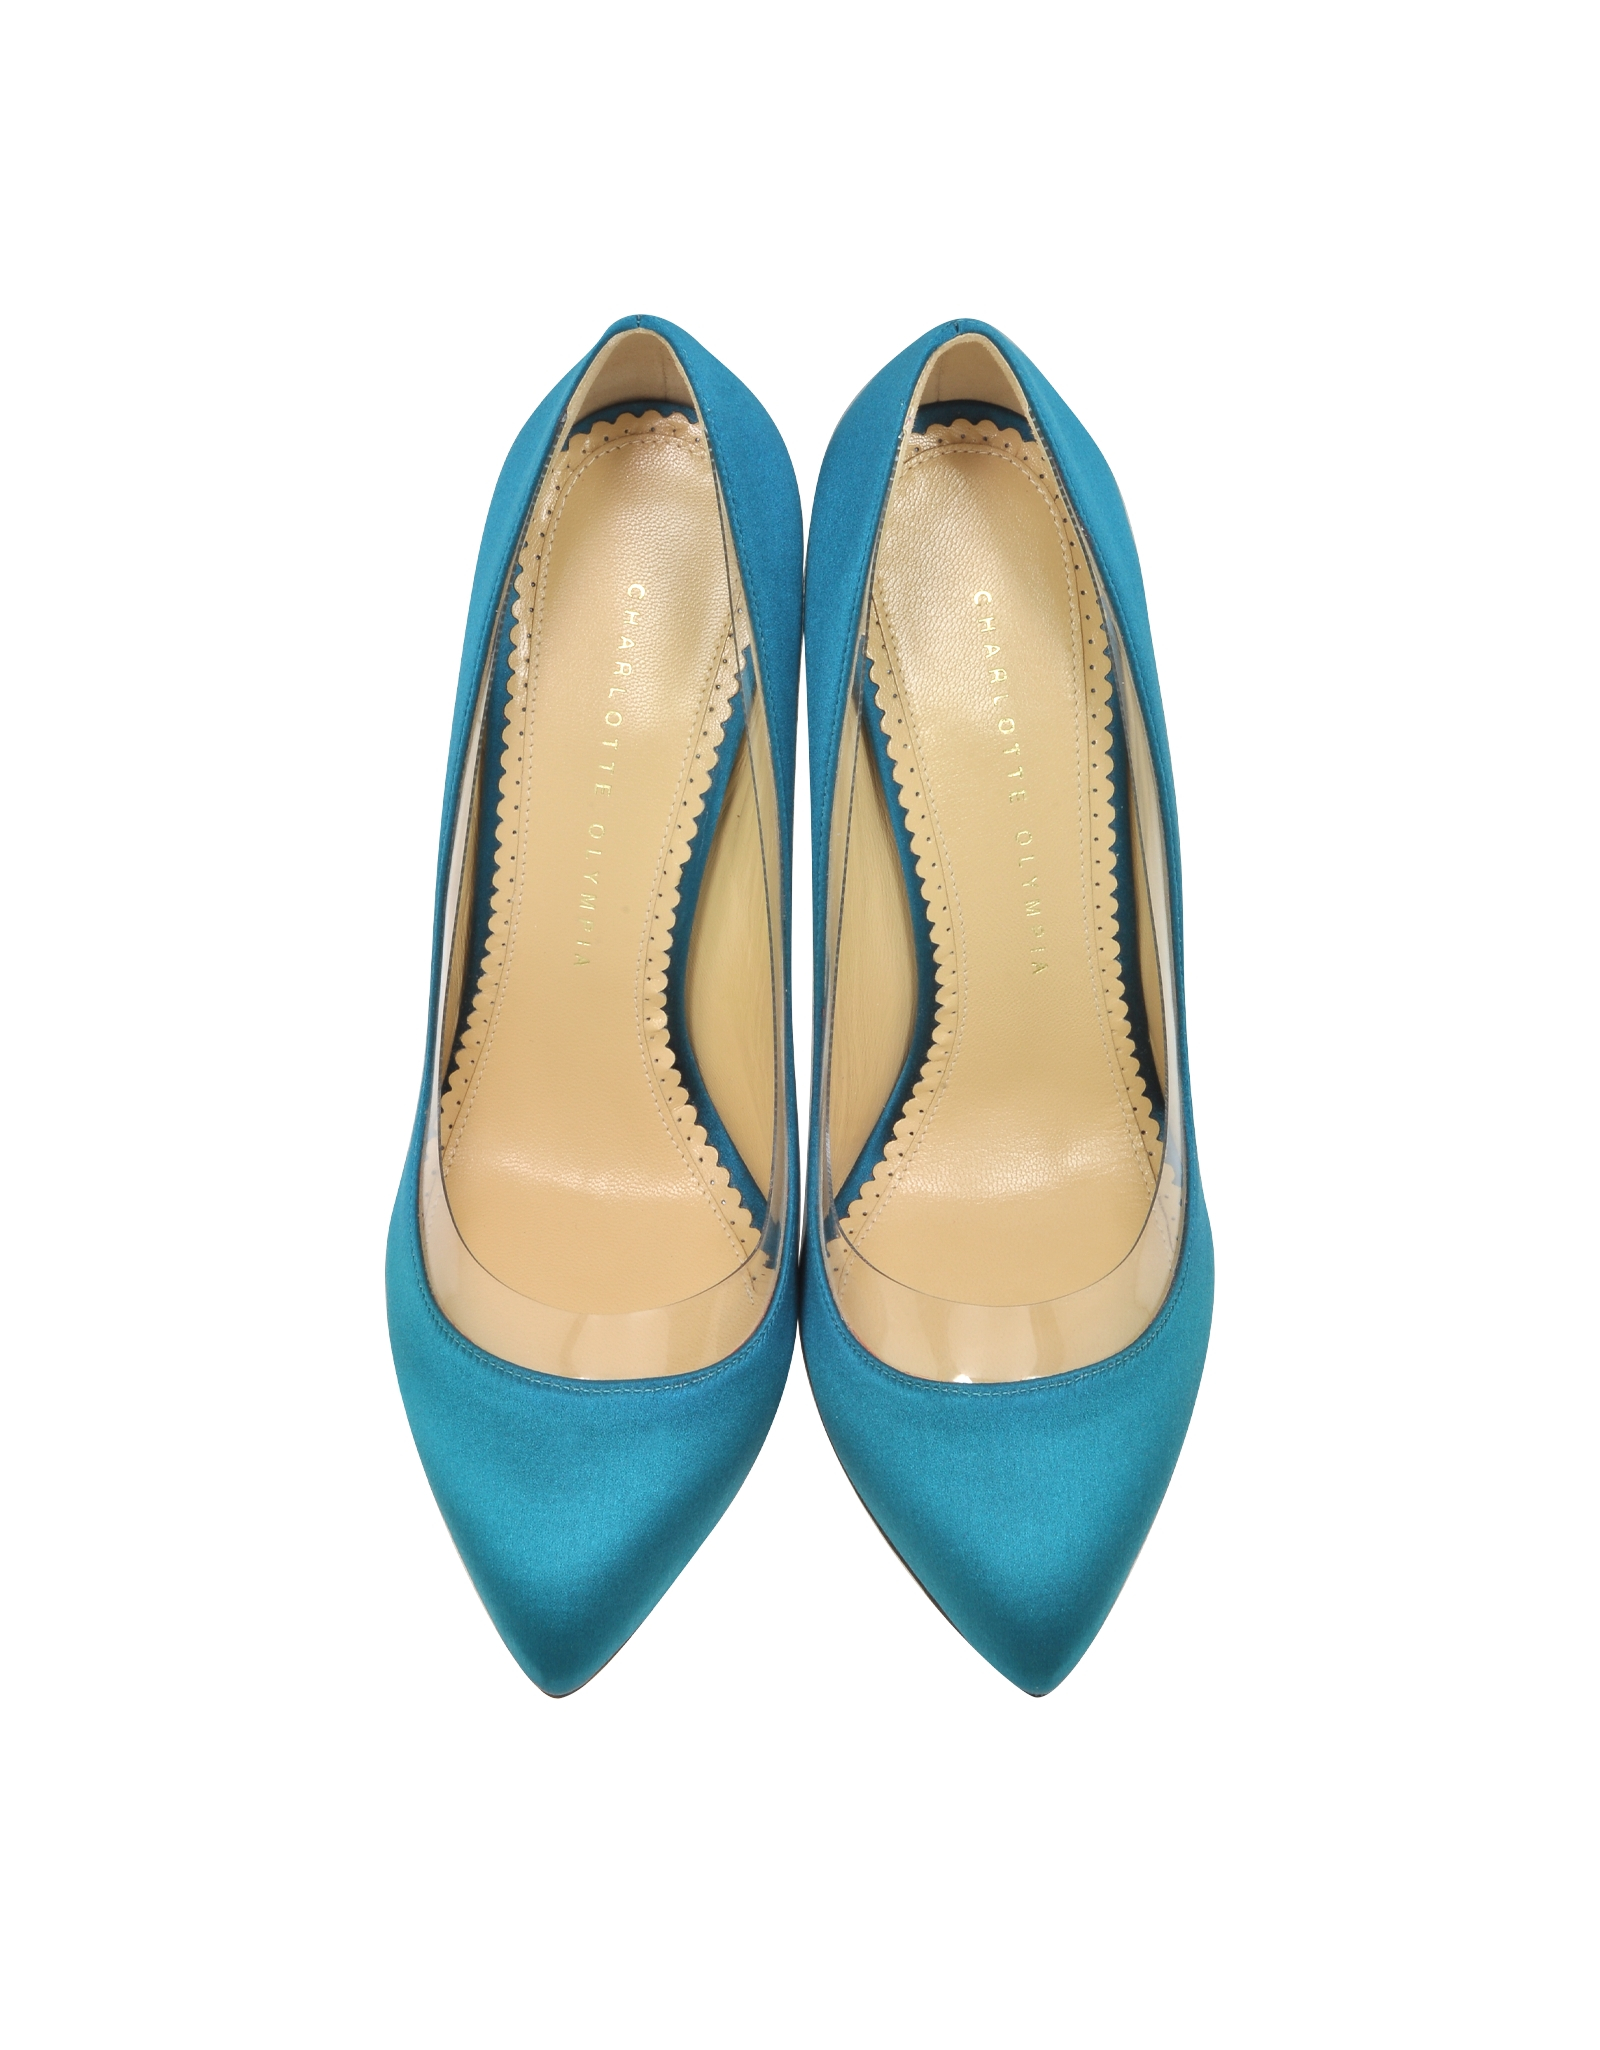 Charlotte olympia Party Shoes 110 Teal Blue Satin Silk & Pvc Pump in ...